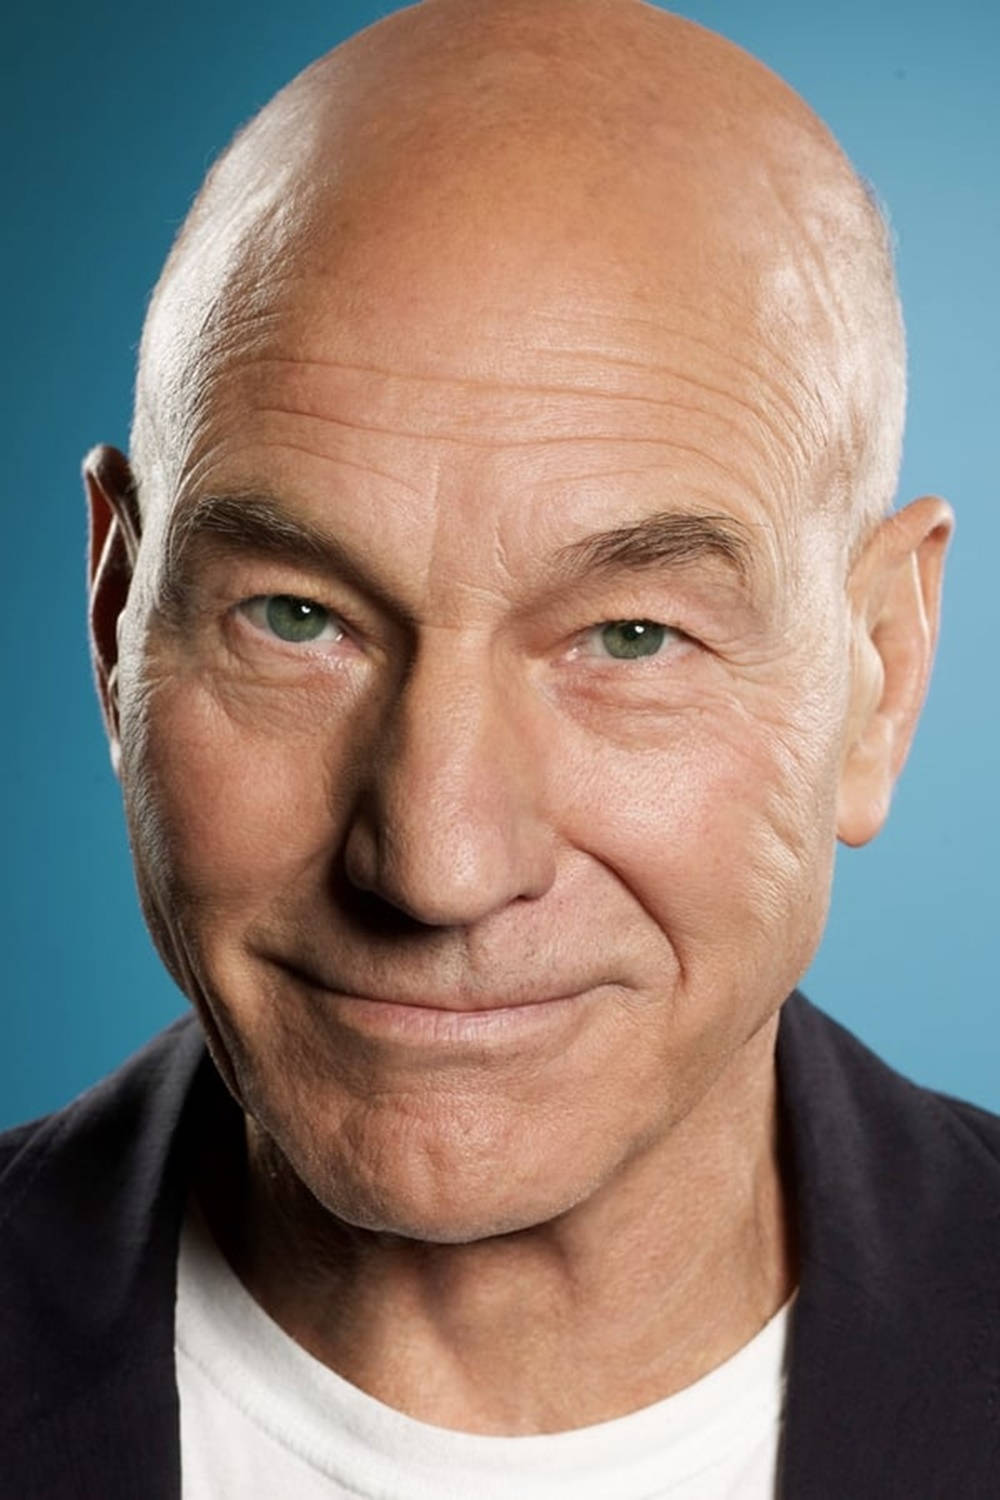 Patrick Stewart Smiling With Closed Lips Wallpaper